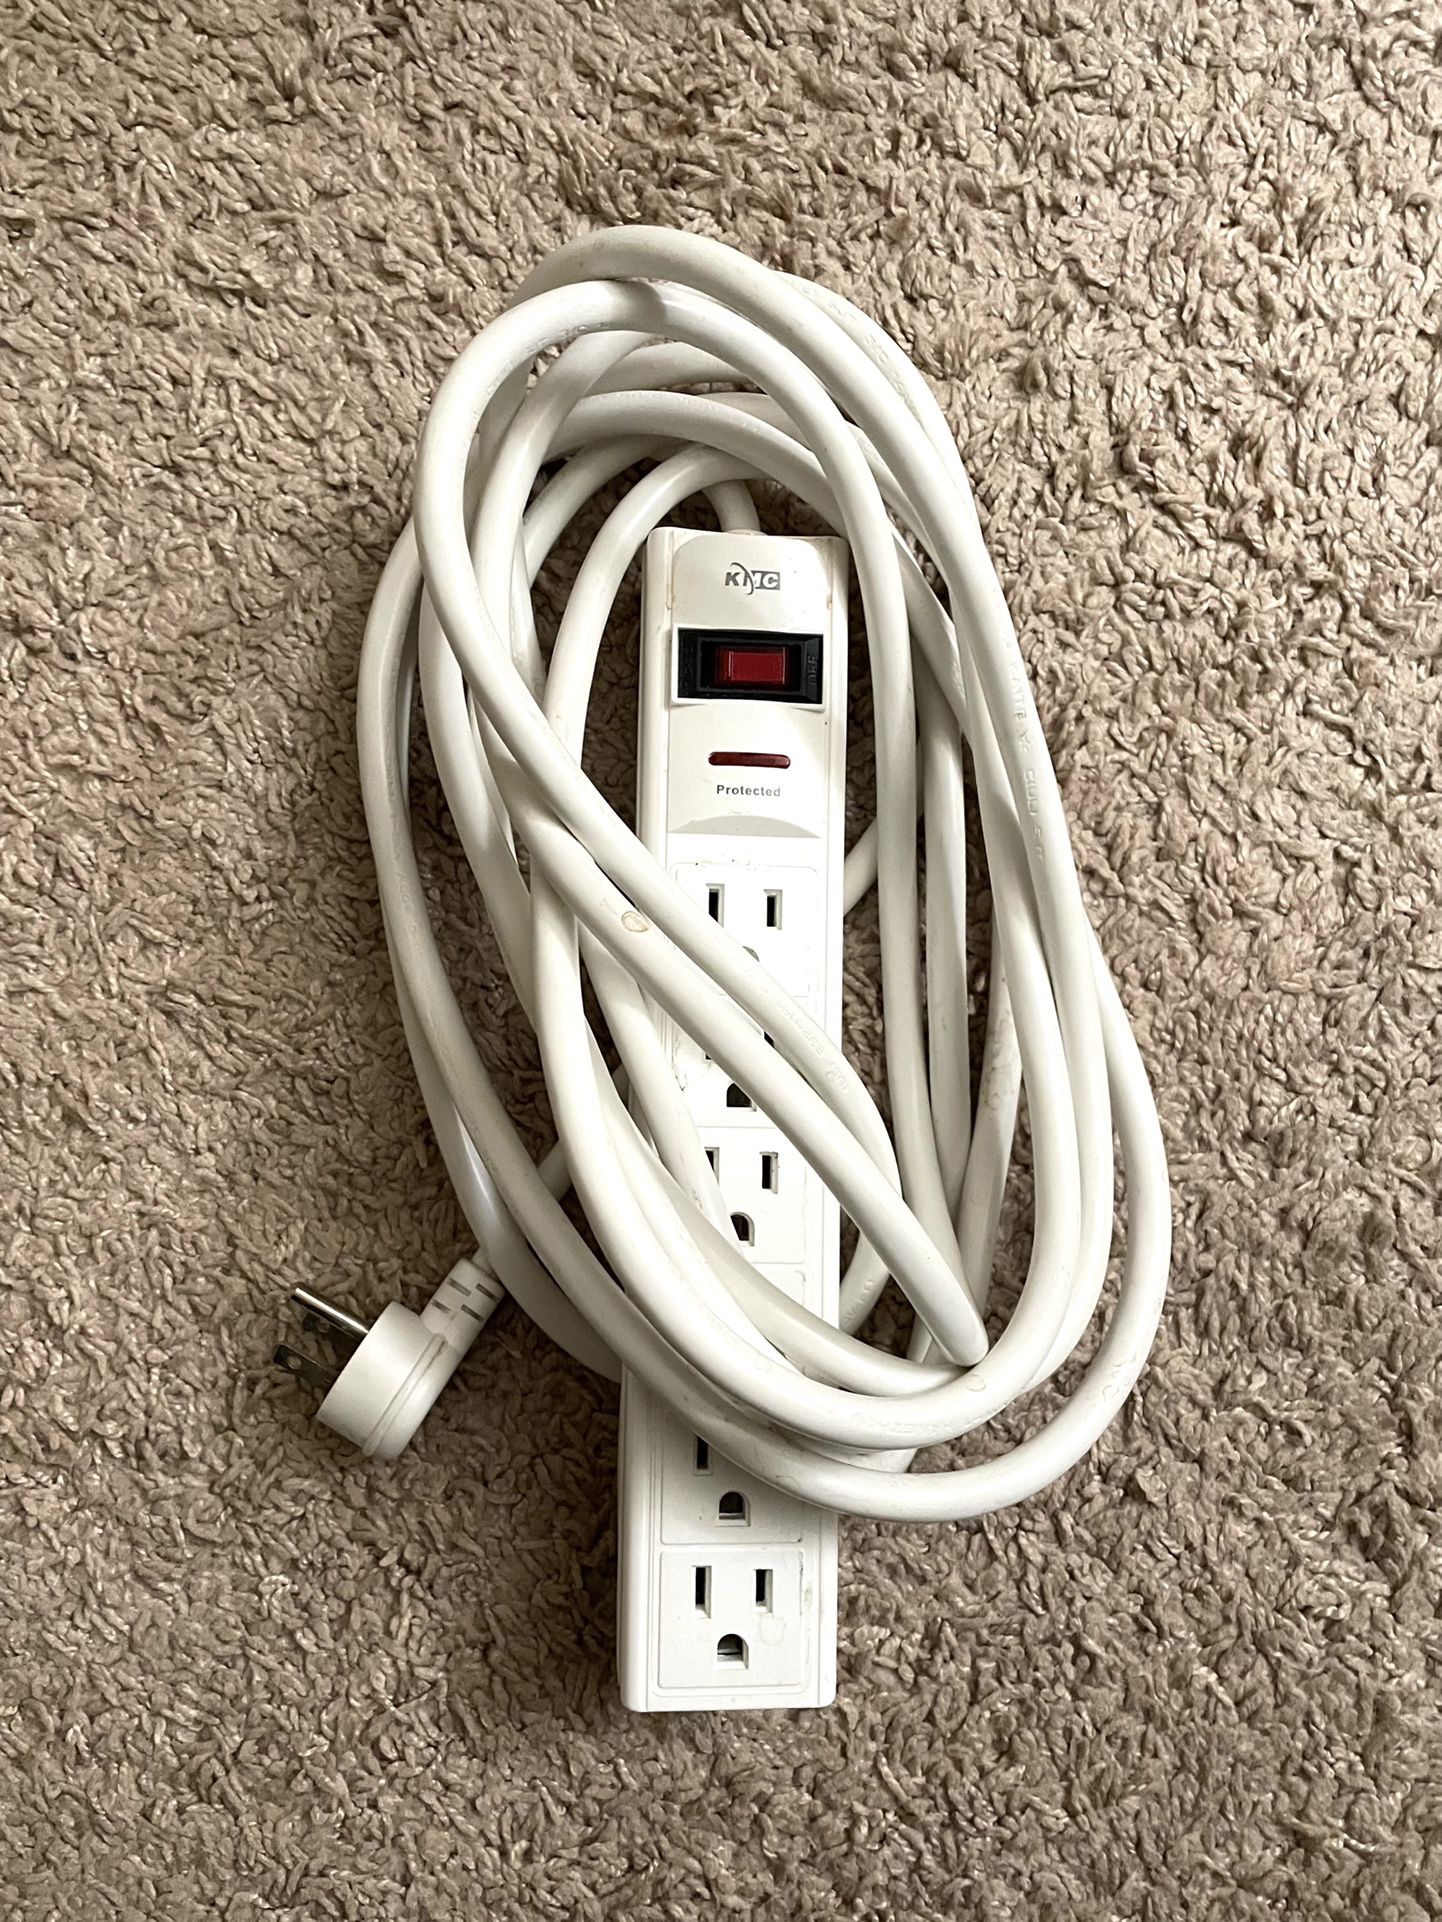 Power Strip With Surge Protector